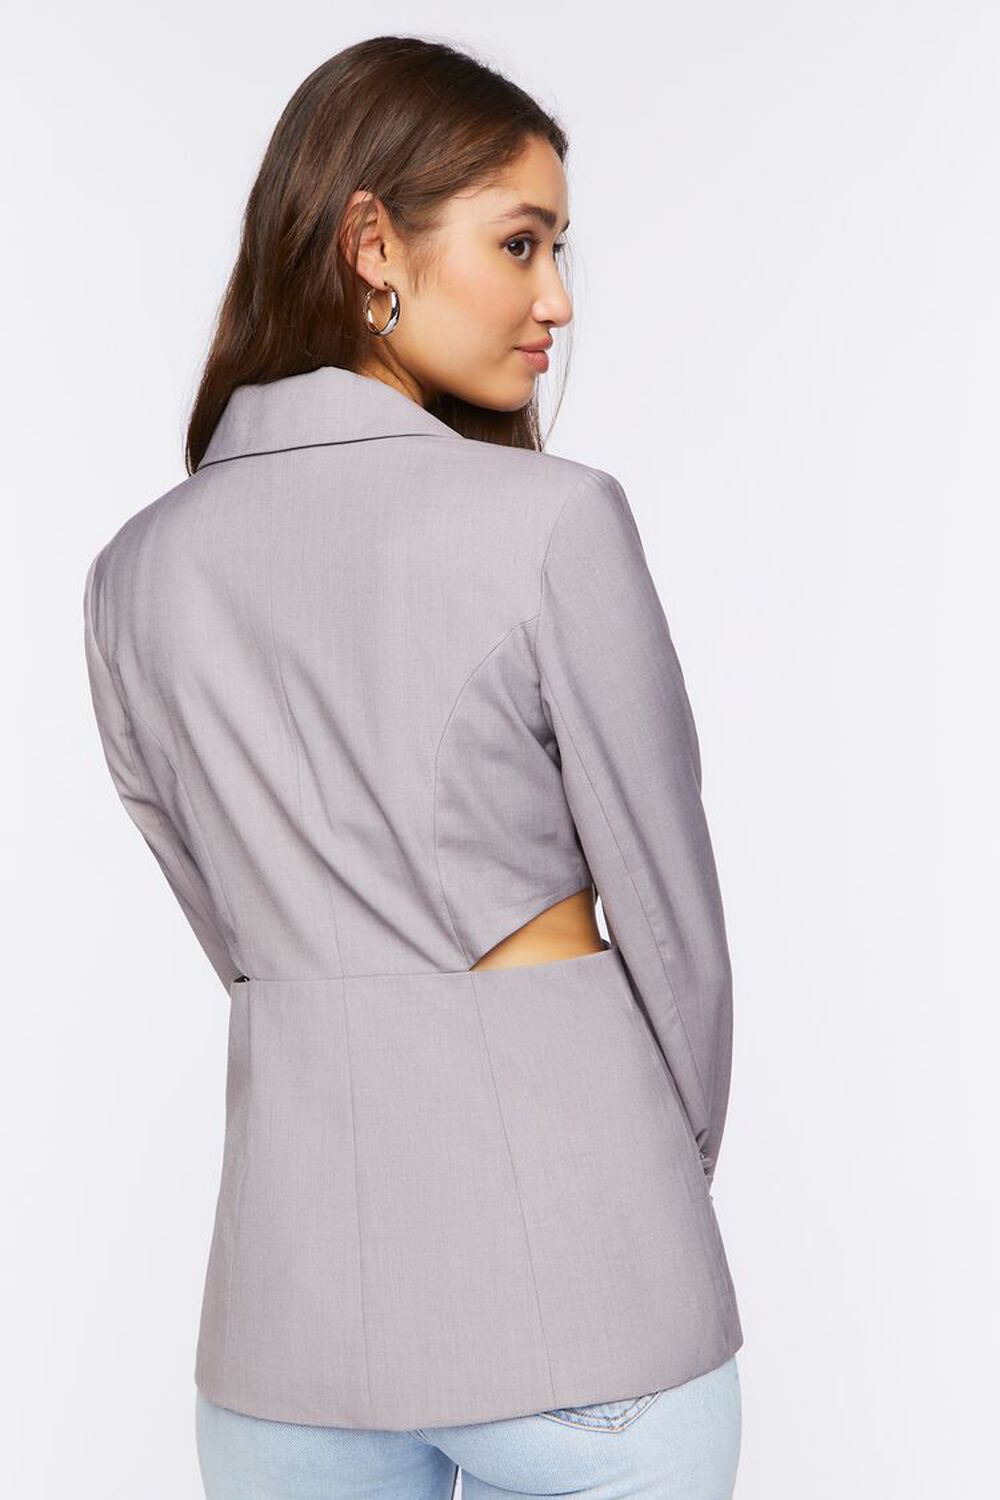 GREY Double-Breasted Cutout Blazer, image 3